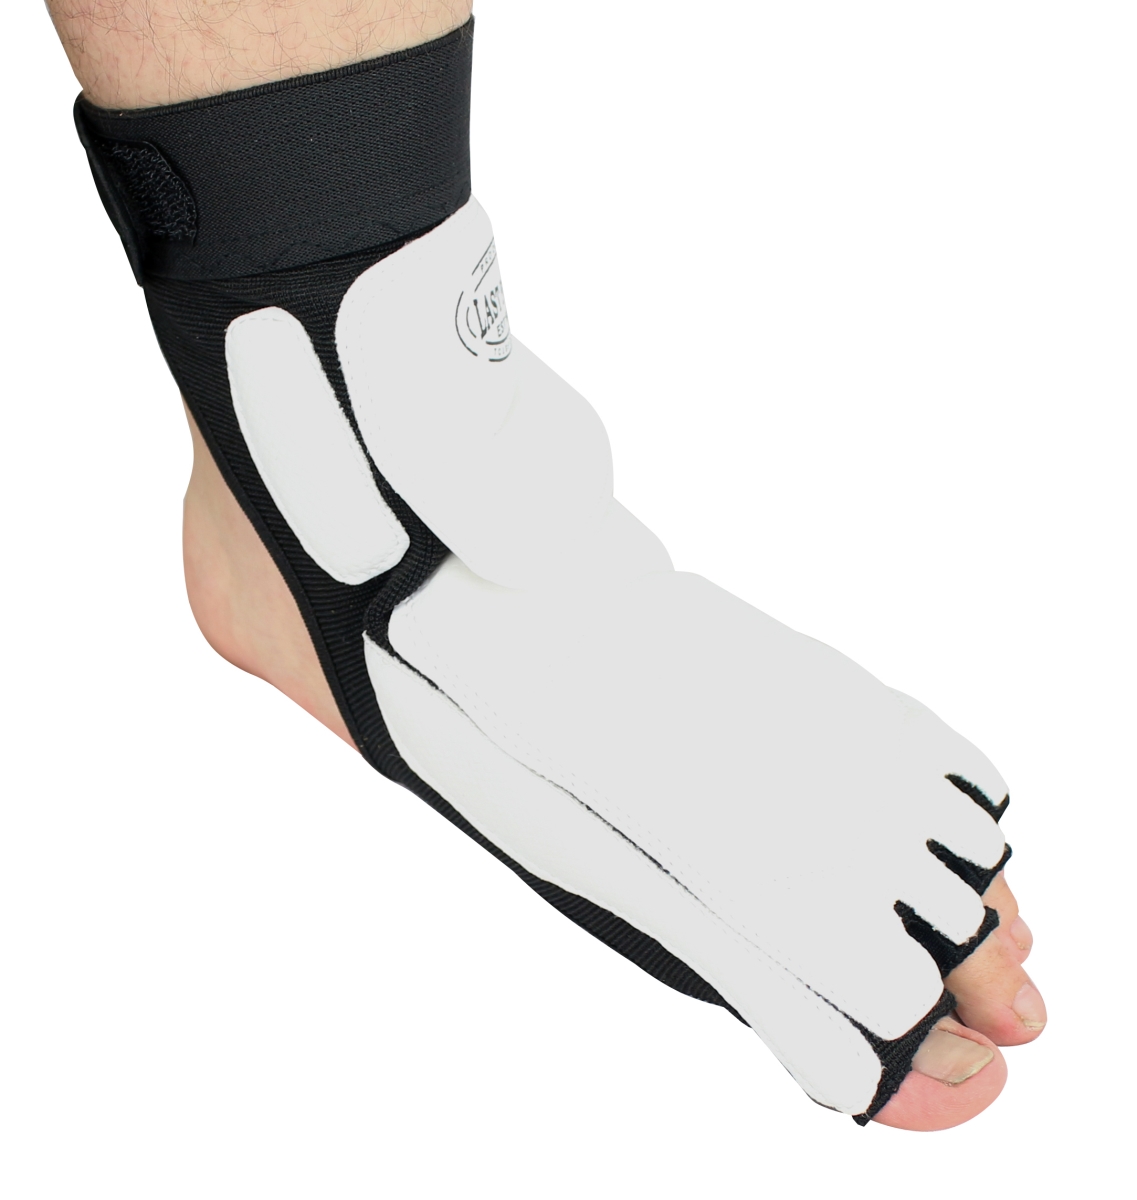 9619-l High Quality Taekwondo Foot Ankle Support Protector Kick Boxing Footwear - Large